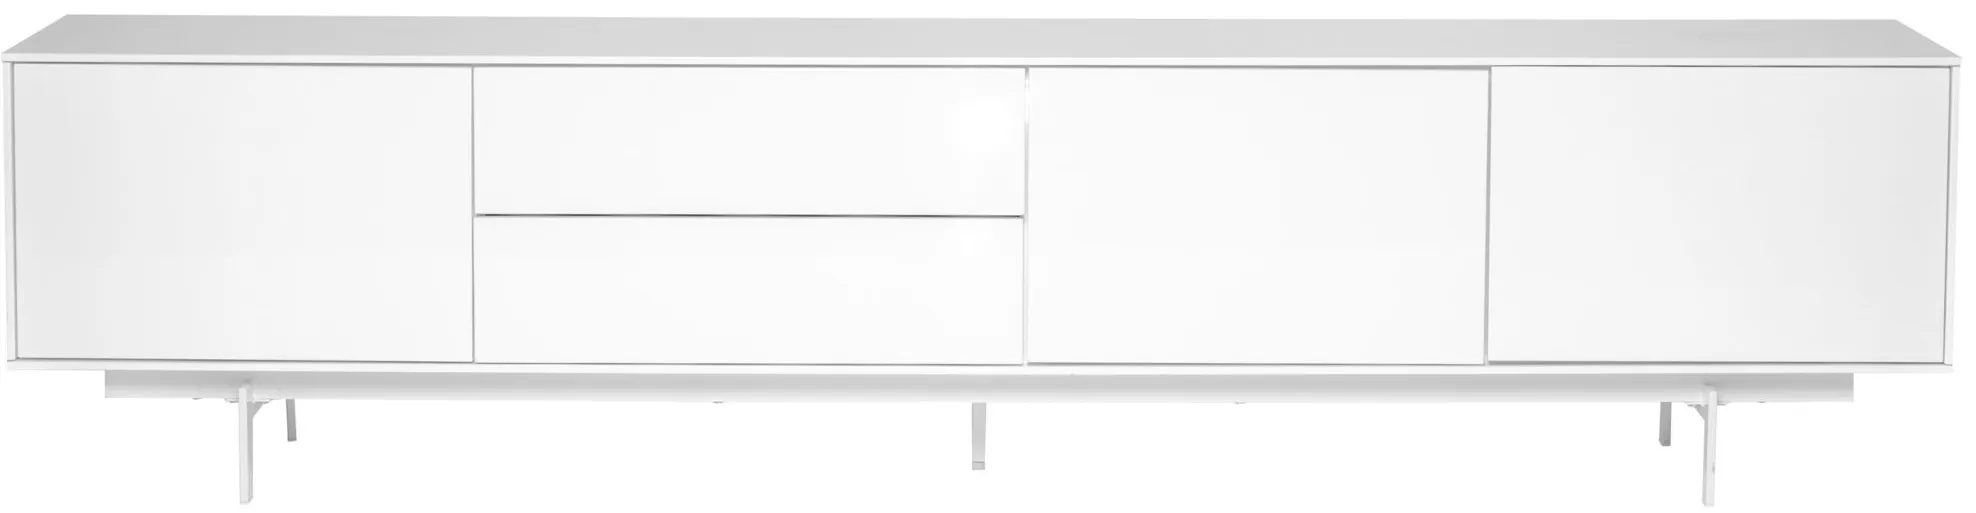 Birmingham 82" Media Stand in High Gloss White/White Powder Coated Steel by EuroStyle